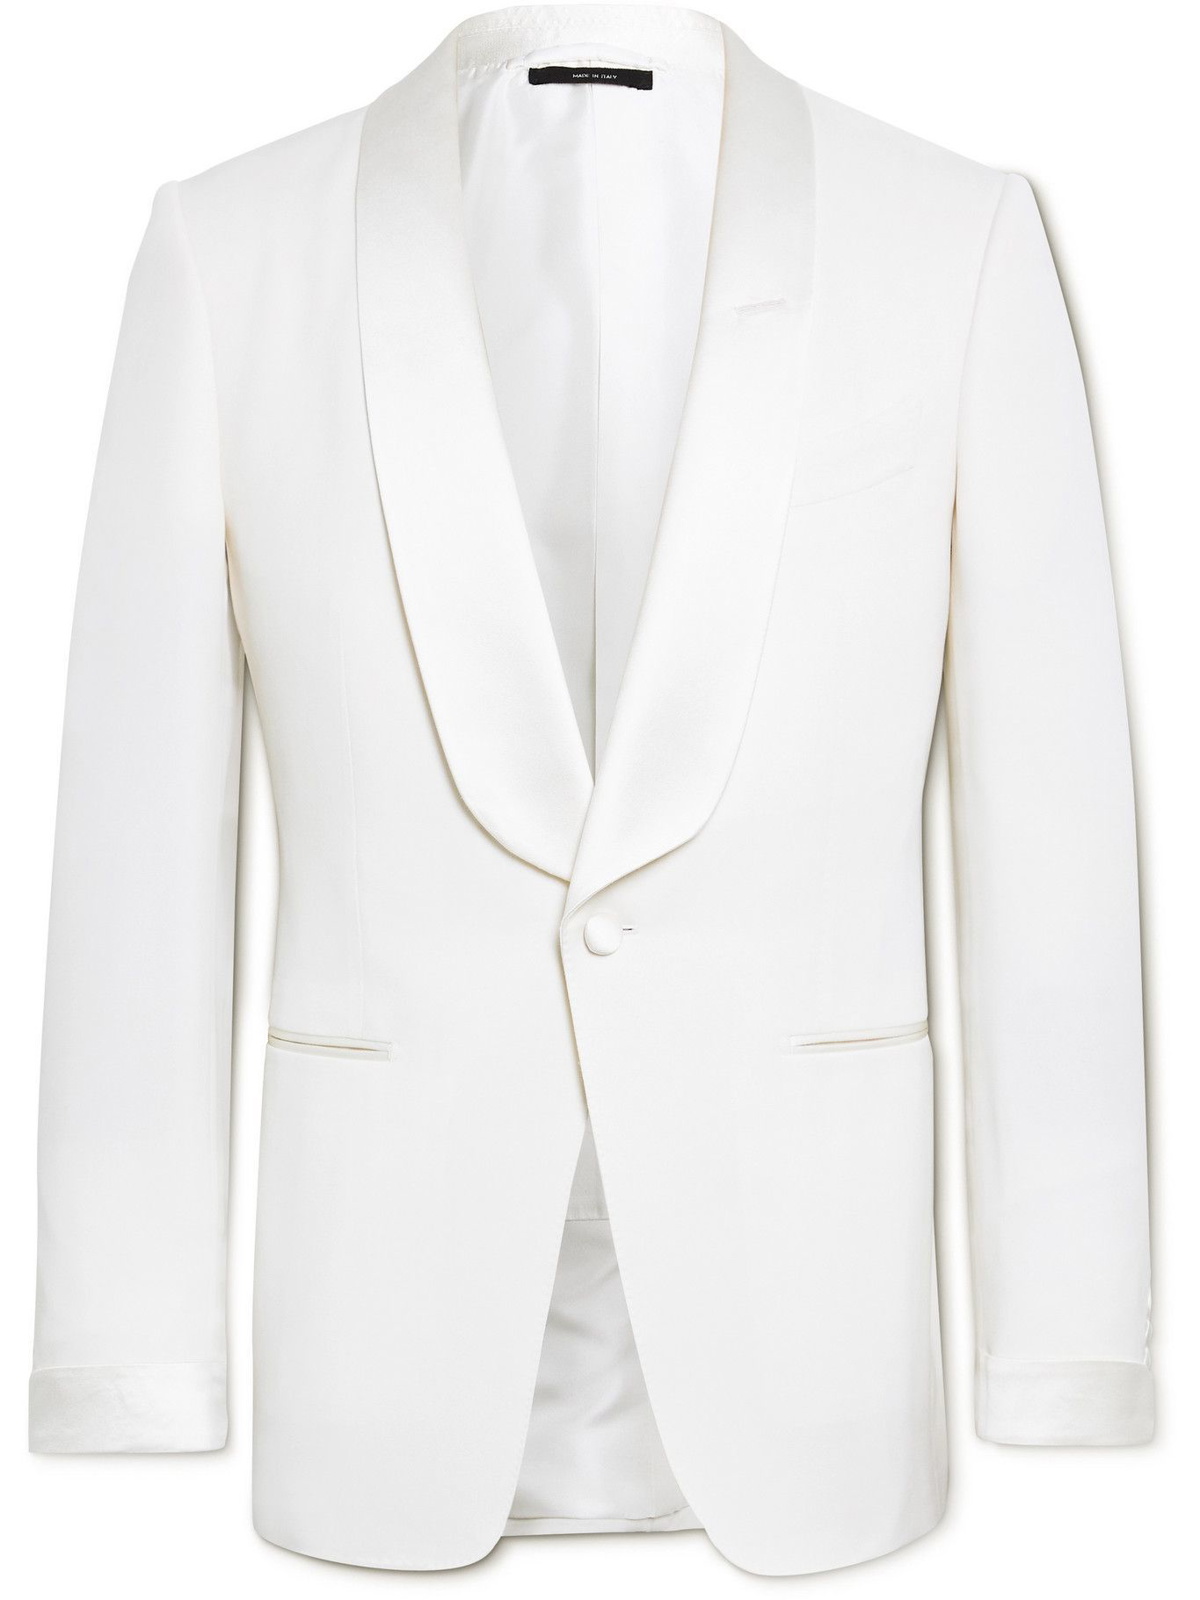 TOM FORD O'Connor Slim-Fit Satin-Trimmed Wool and Mohair-Blend Tuxedo Jacket - White TOM FORD